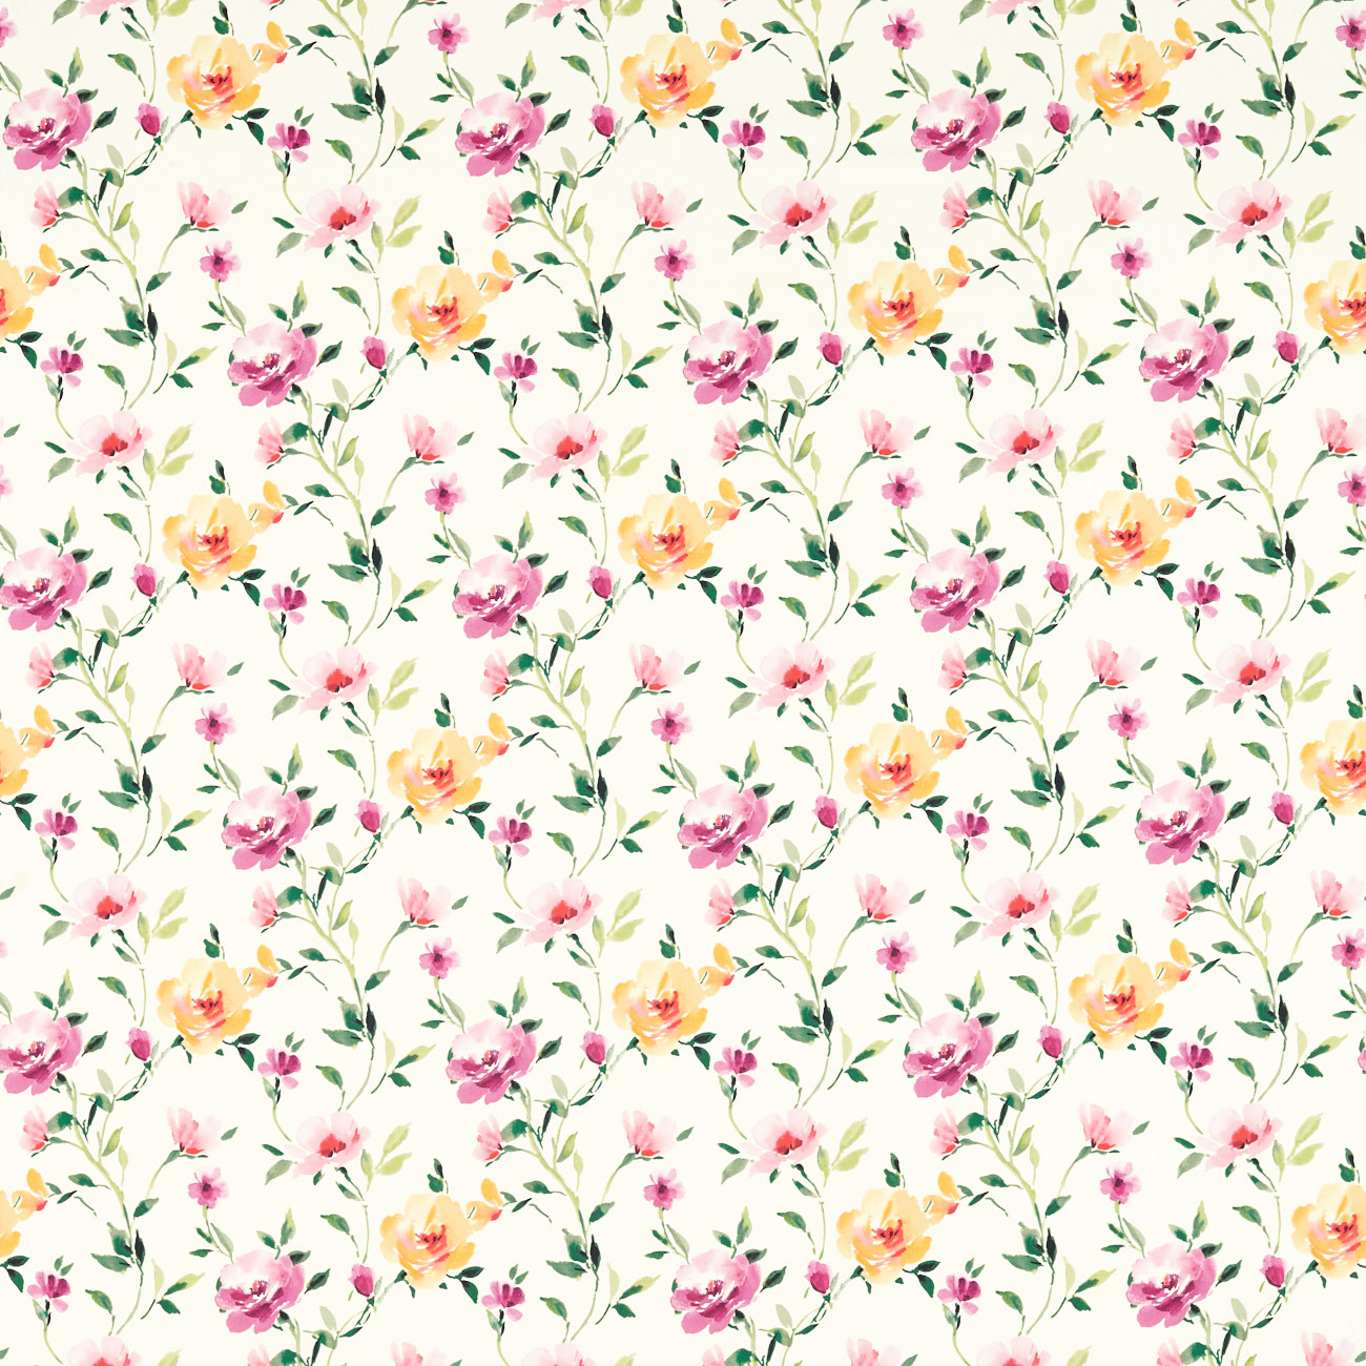 Serena Summer Fabric by STG